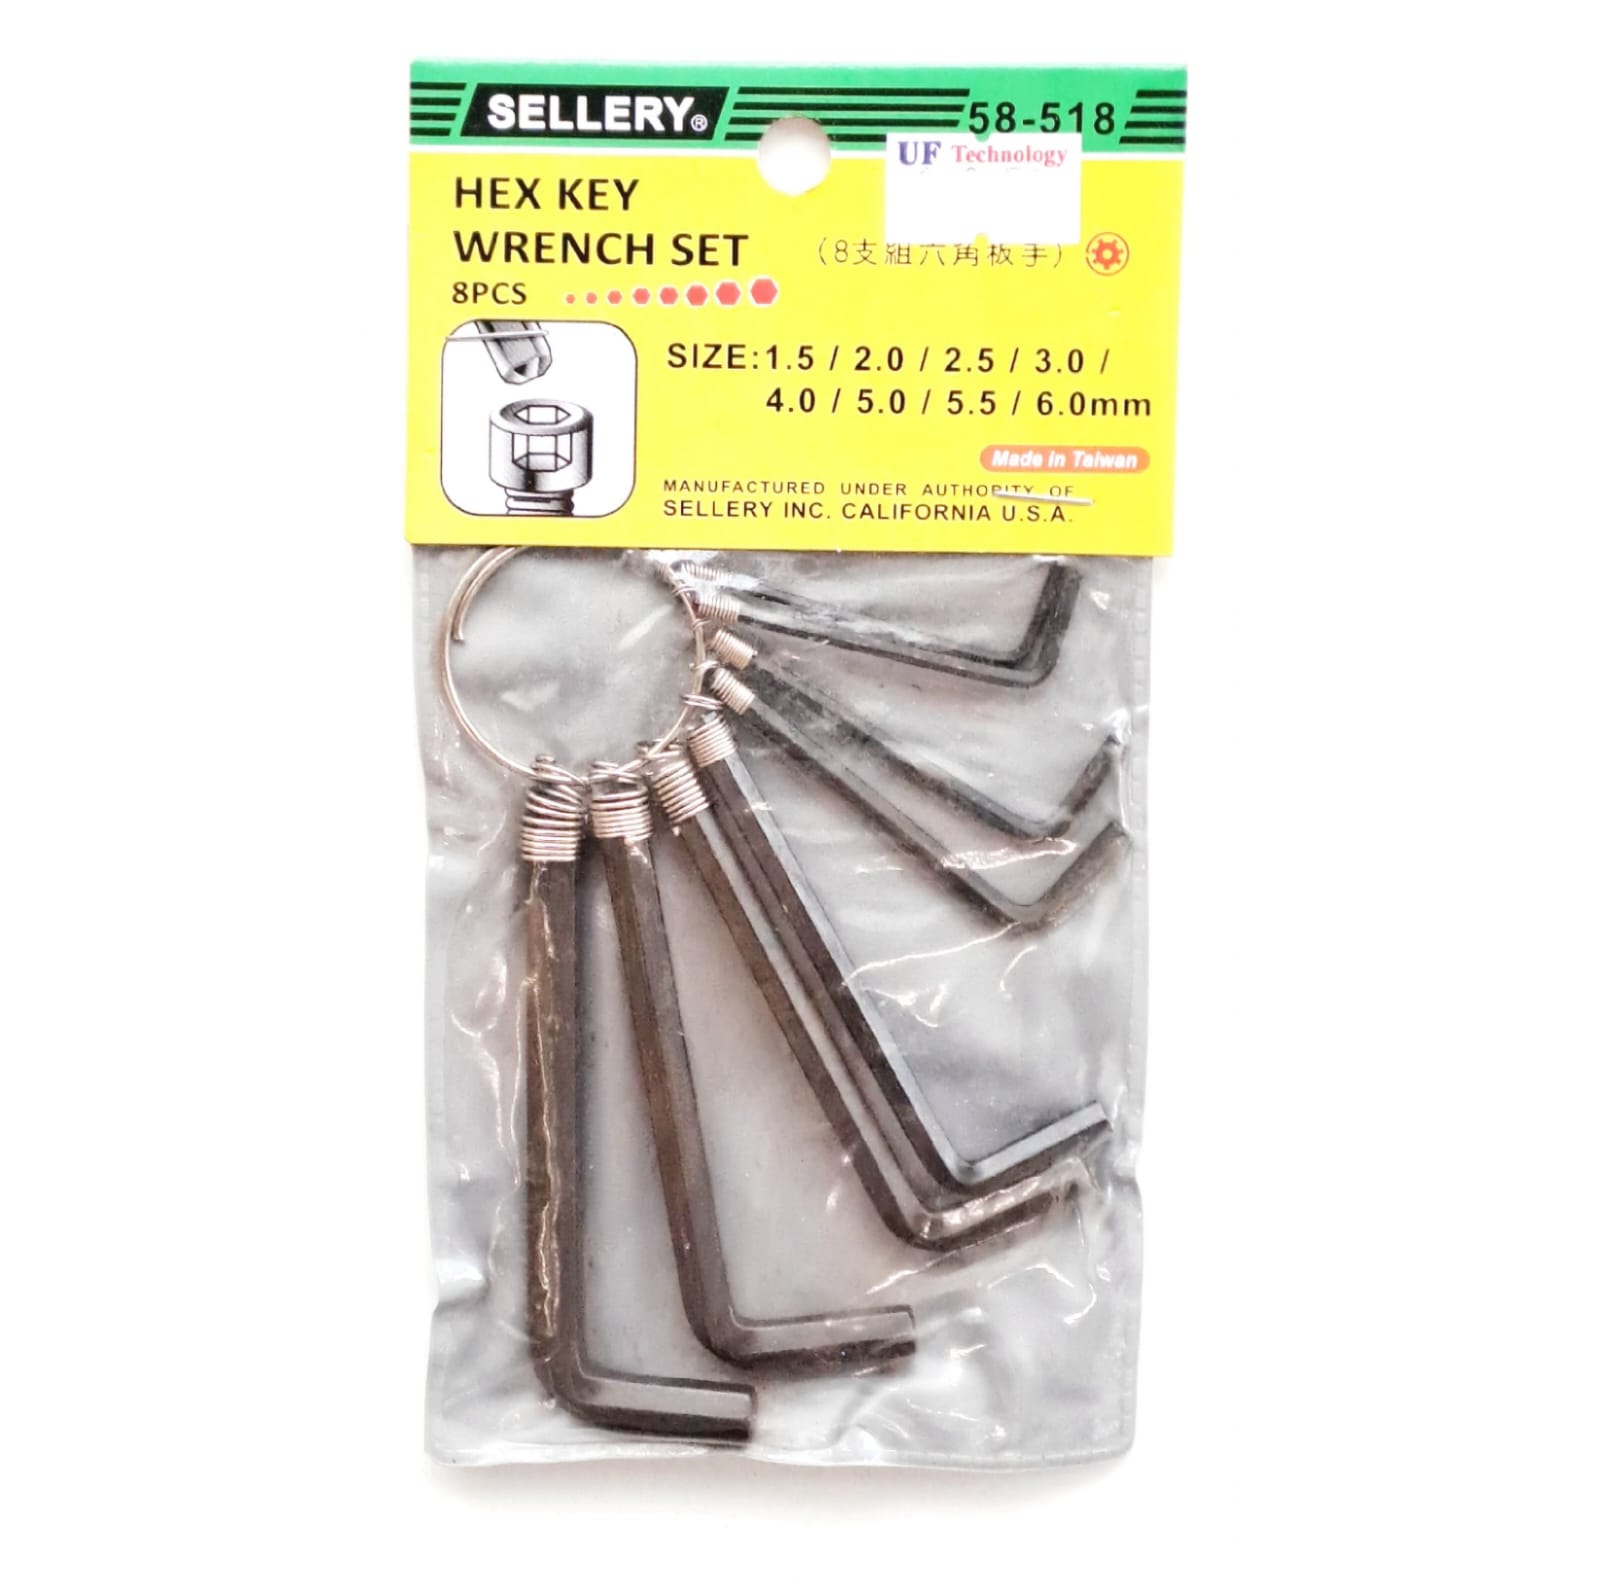 Sellery 58-518 8Pc Hex Key Wrench Set, Size: 1.5/2.0/2.5/3.0/ 4.0/5.0/5.5/6.0mm